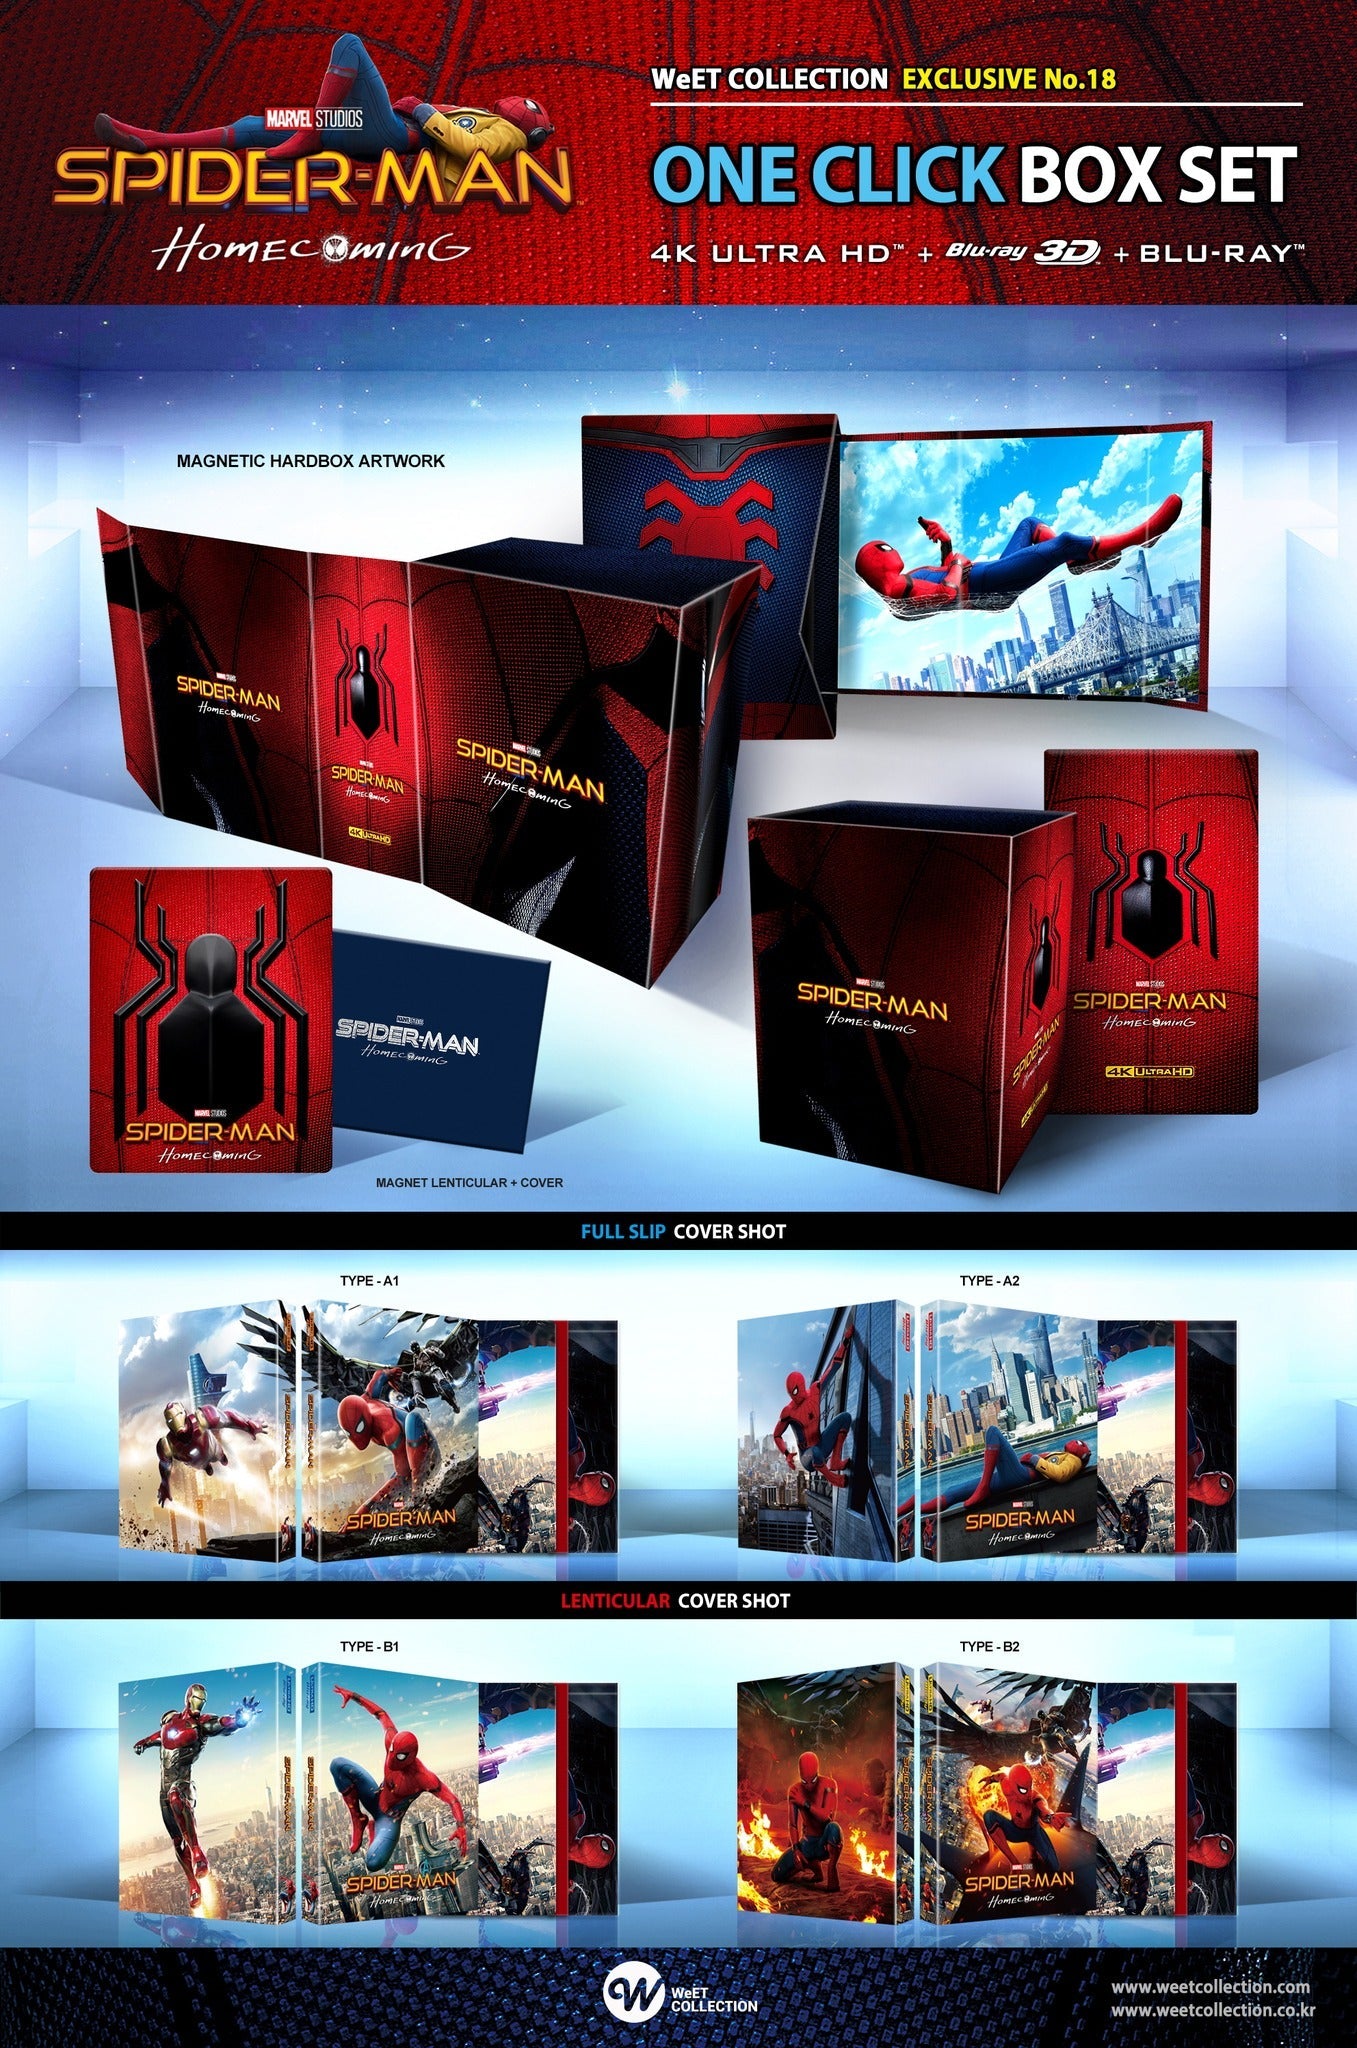 Spider-Man Homecoming 4K 3D Blu-ray Steelbook WeET Collection Exclusiv